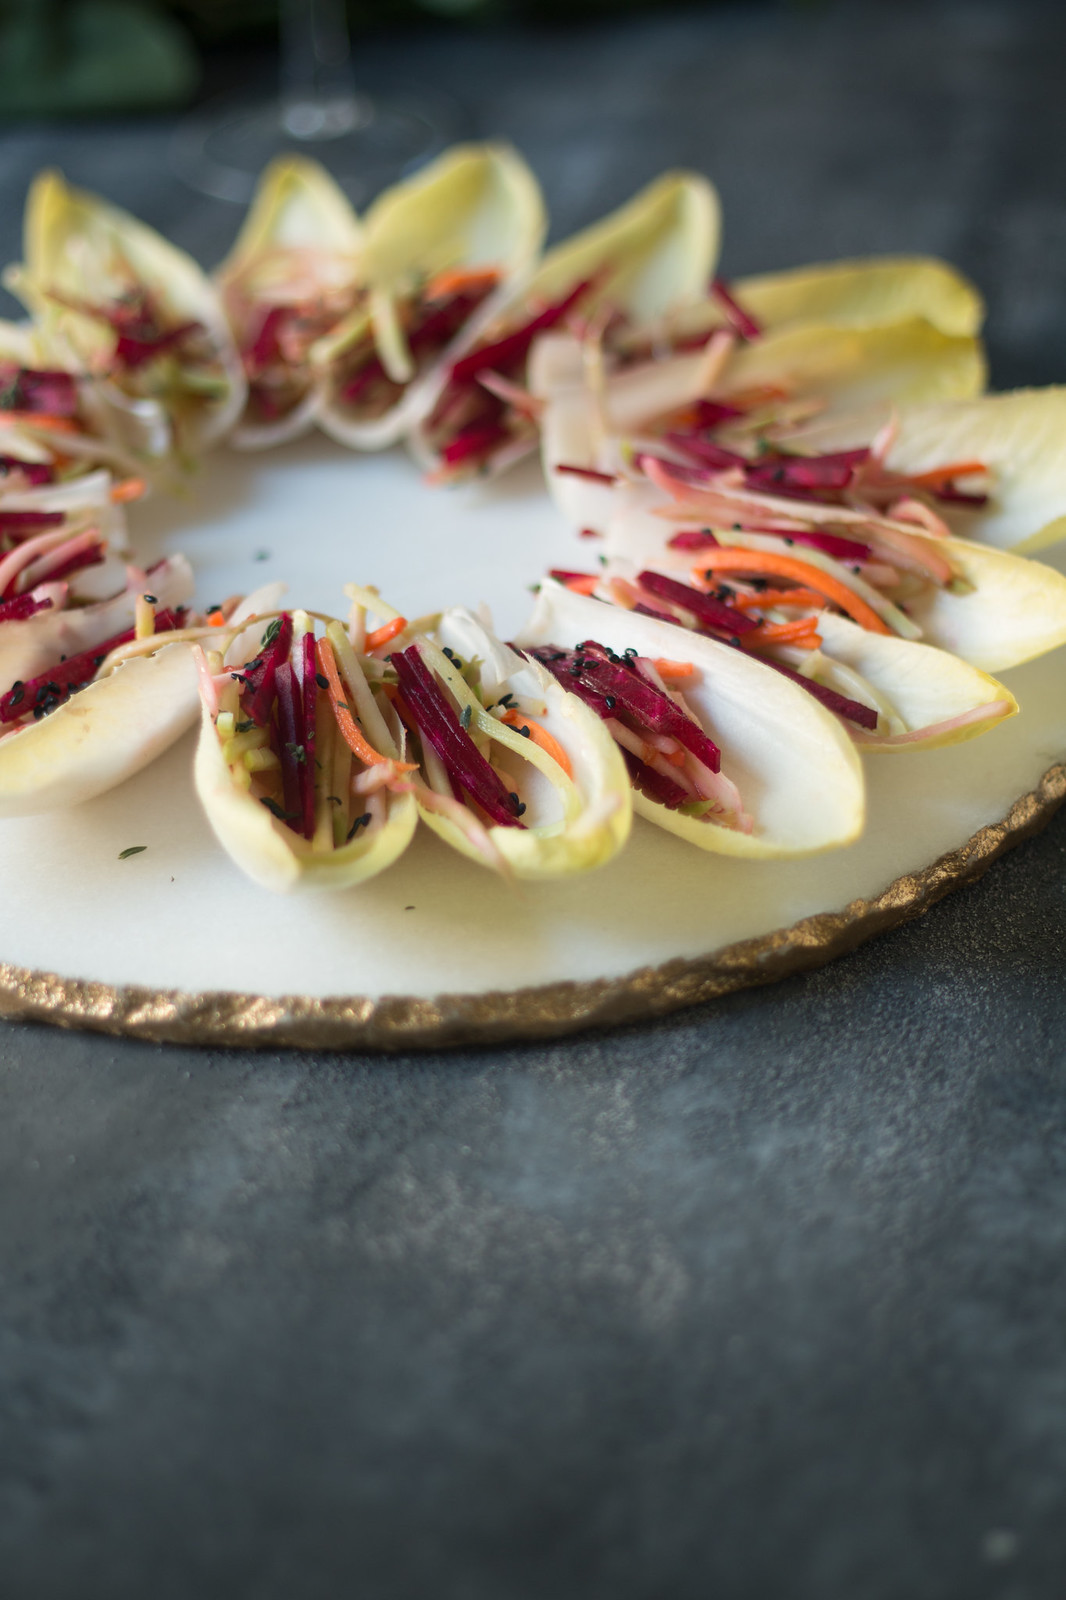 Endive Boats with Beet-Carrot-Fennel in Asian dressing